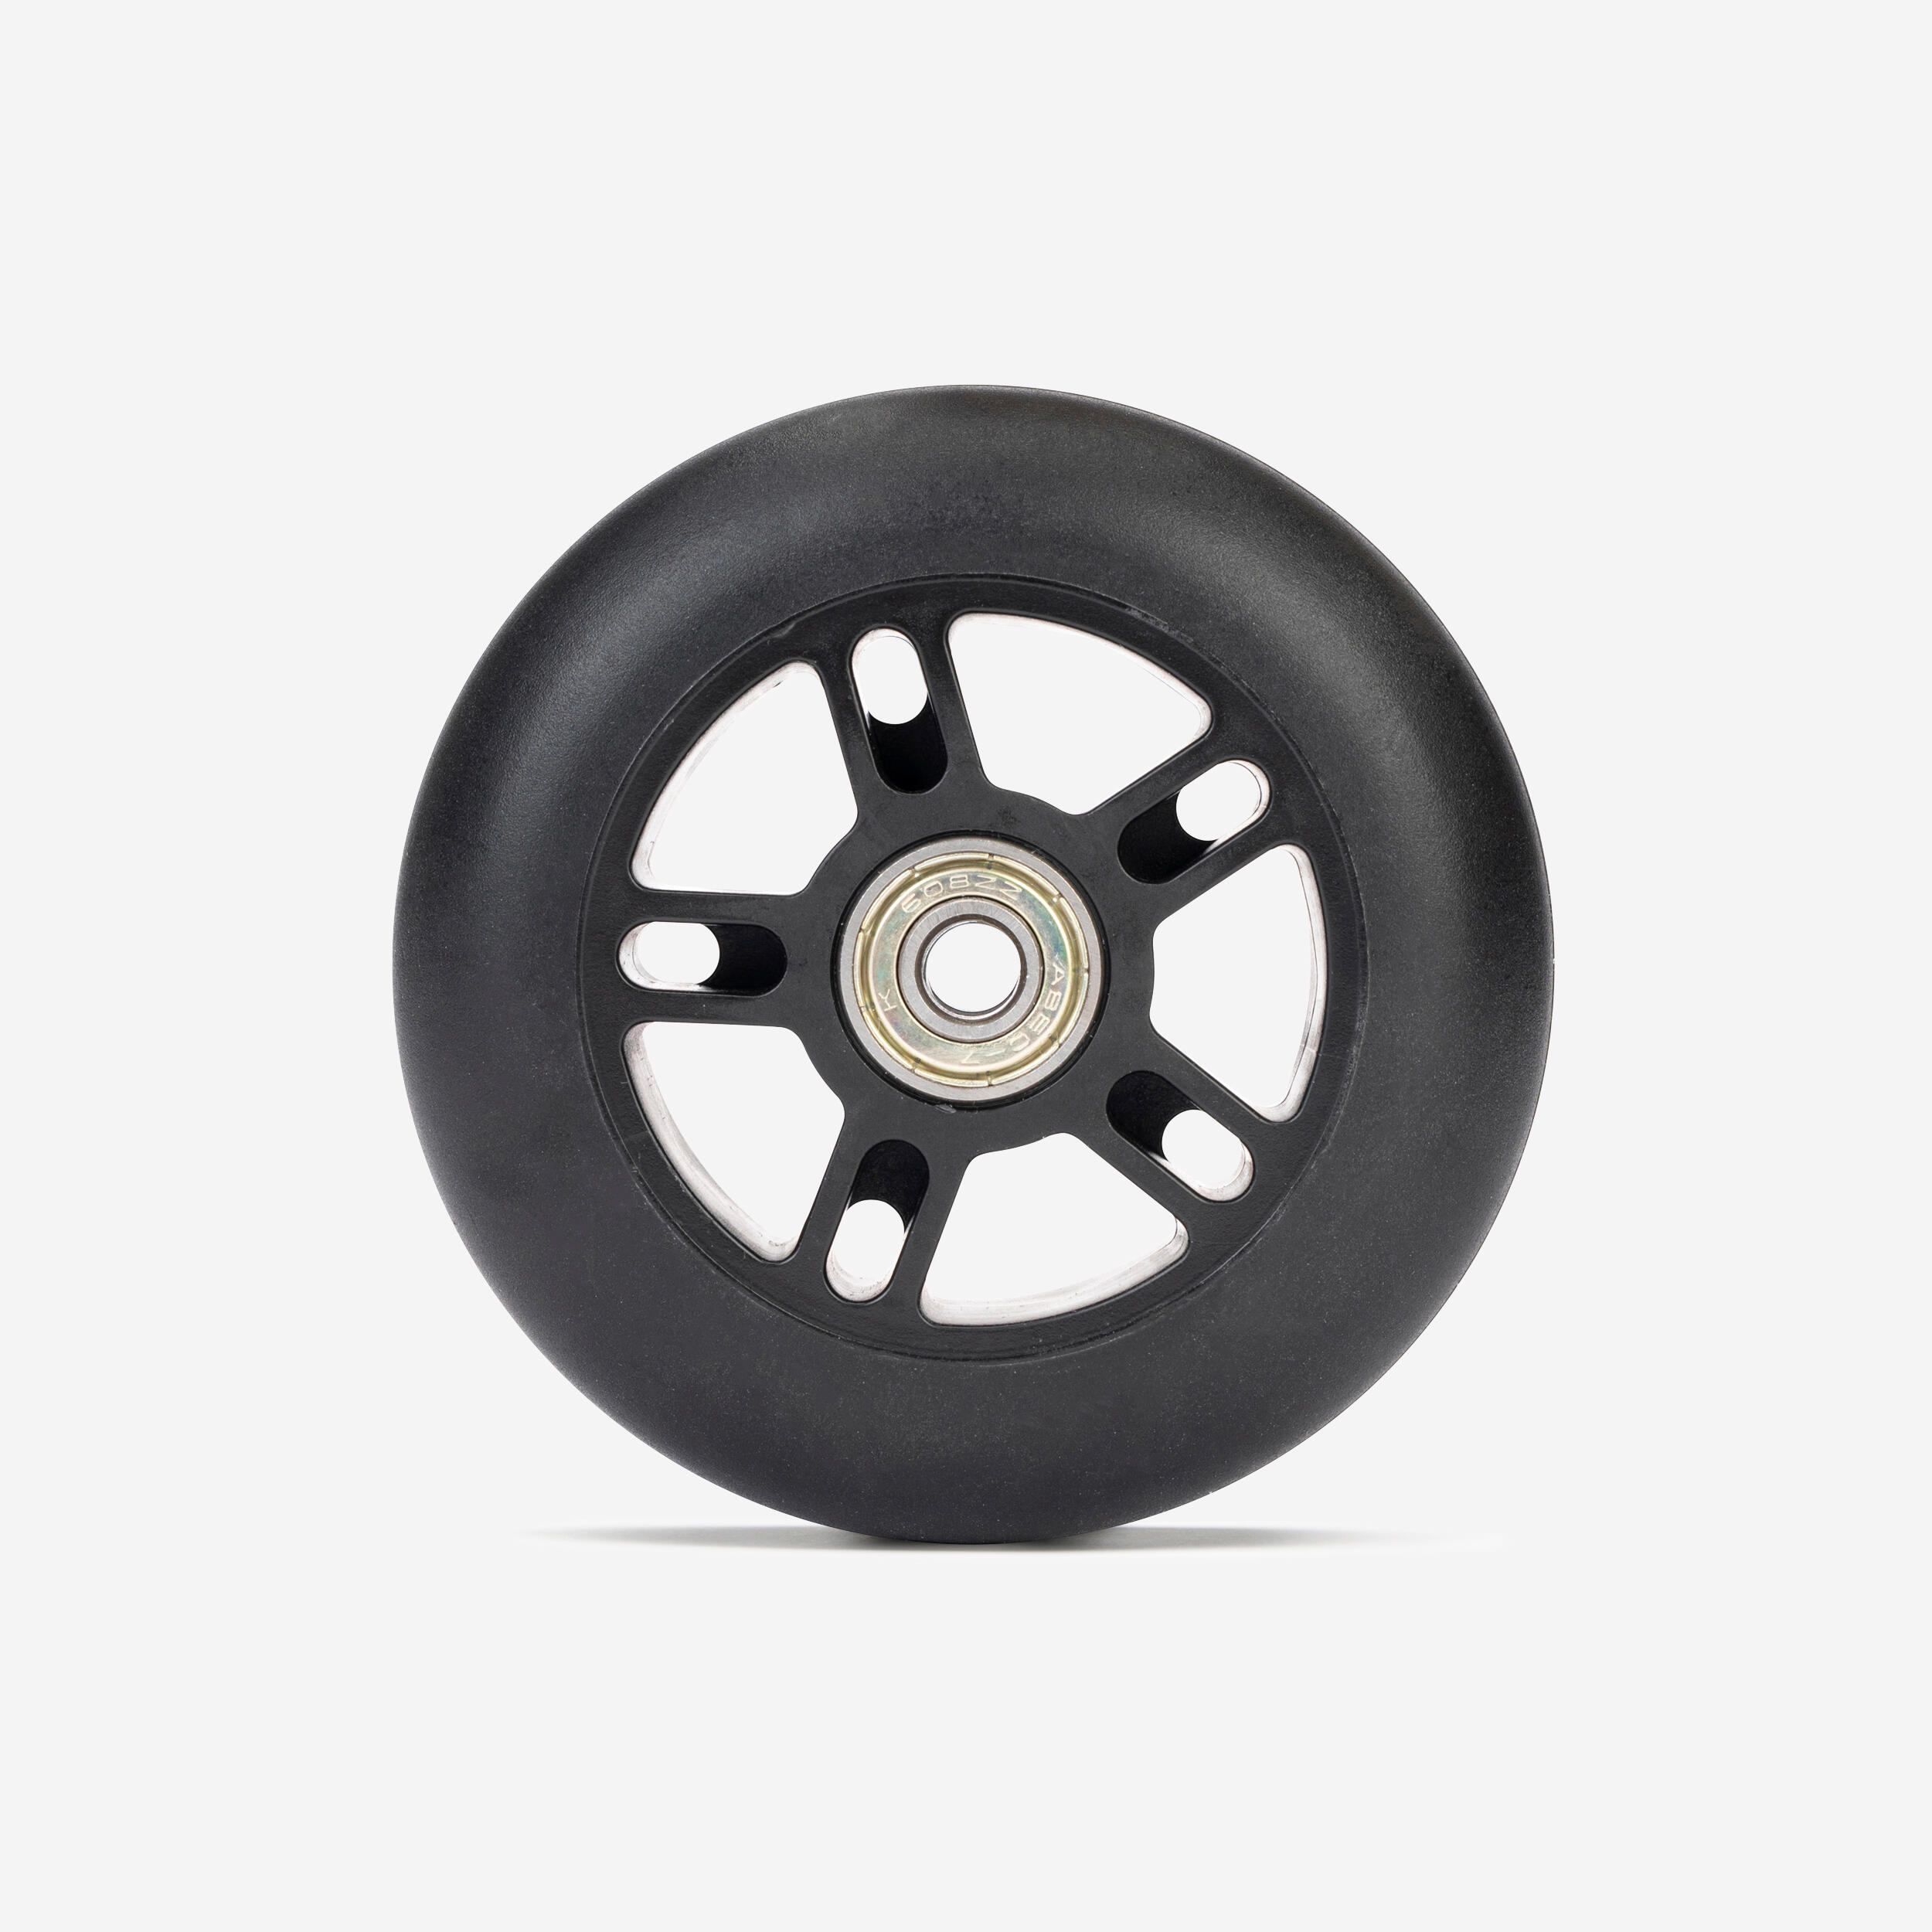 Scooter Wheel with Bearings 100 mm - OXELO